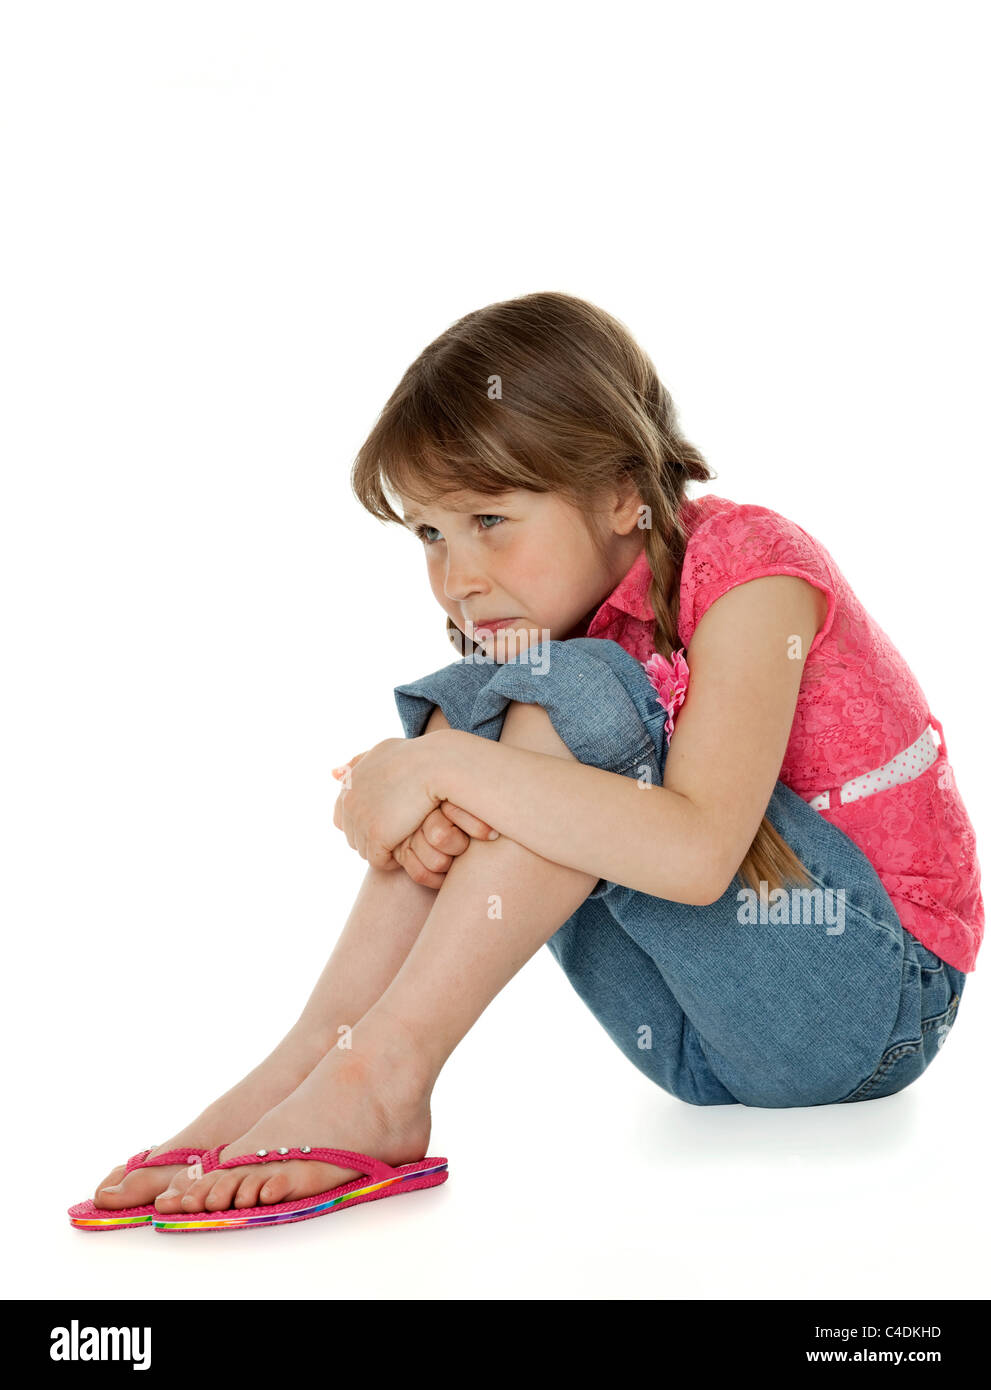 Young girl sitting, hugging knees, sad facial expression, on white